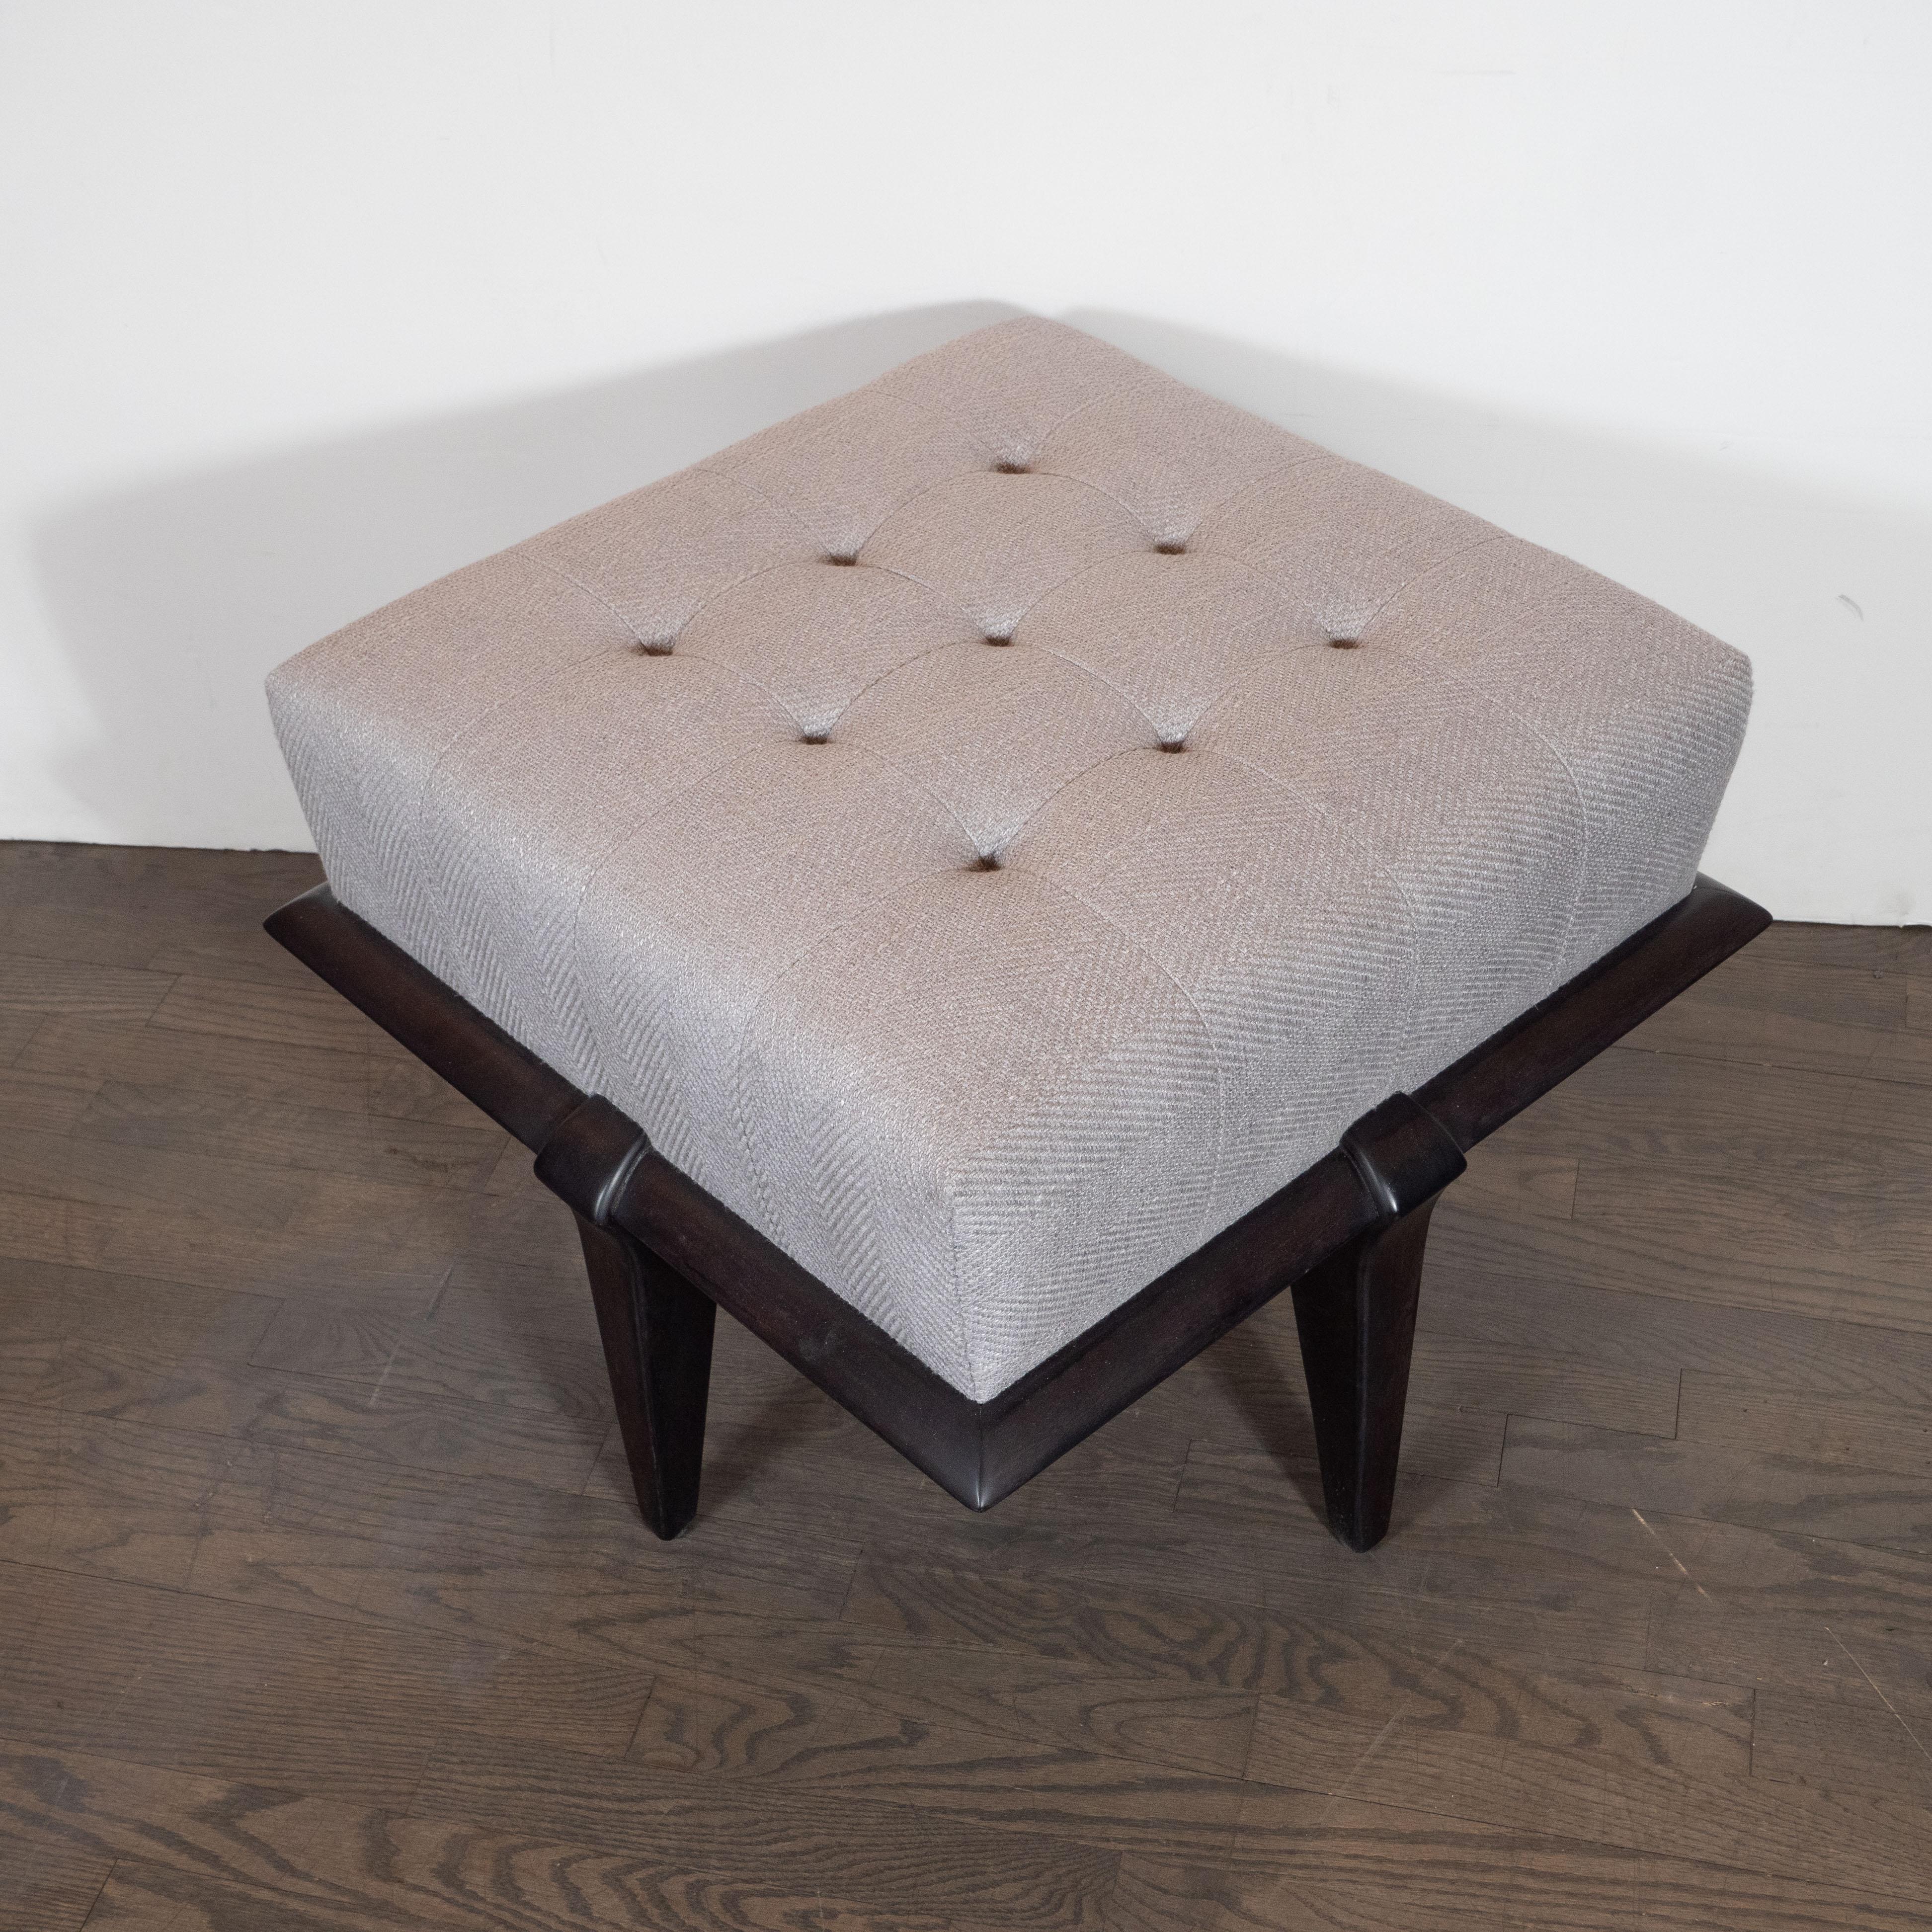 Mid-20th Century Mid-Century Modern Ebonized Walnut and Dove Gray Button Tufted Ottoman For Sale